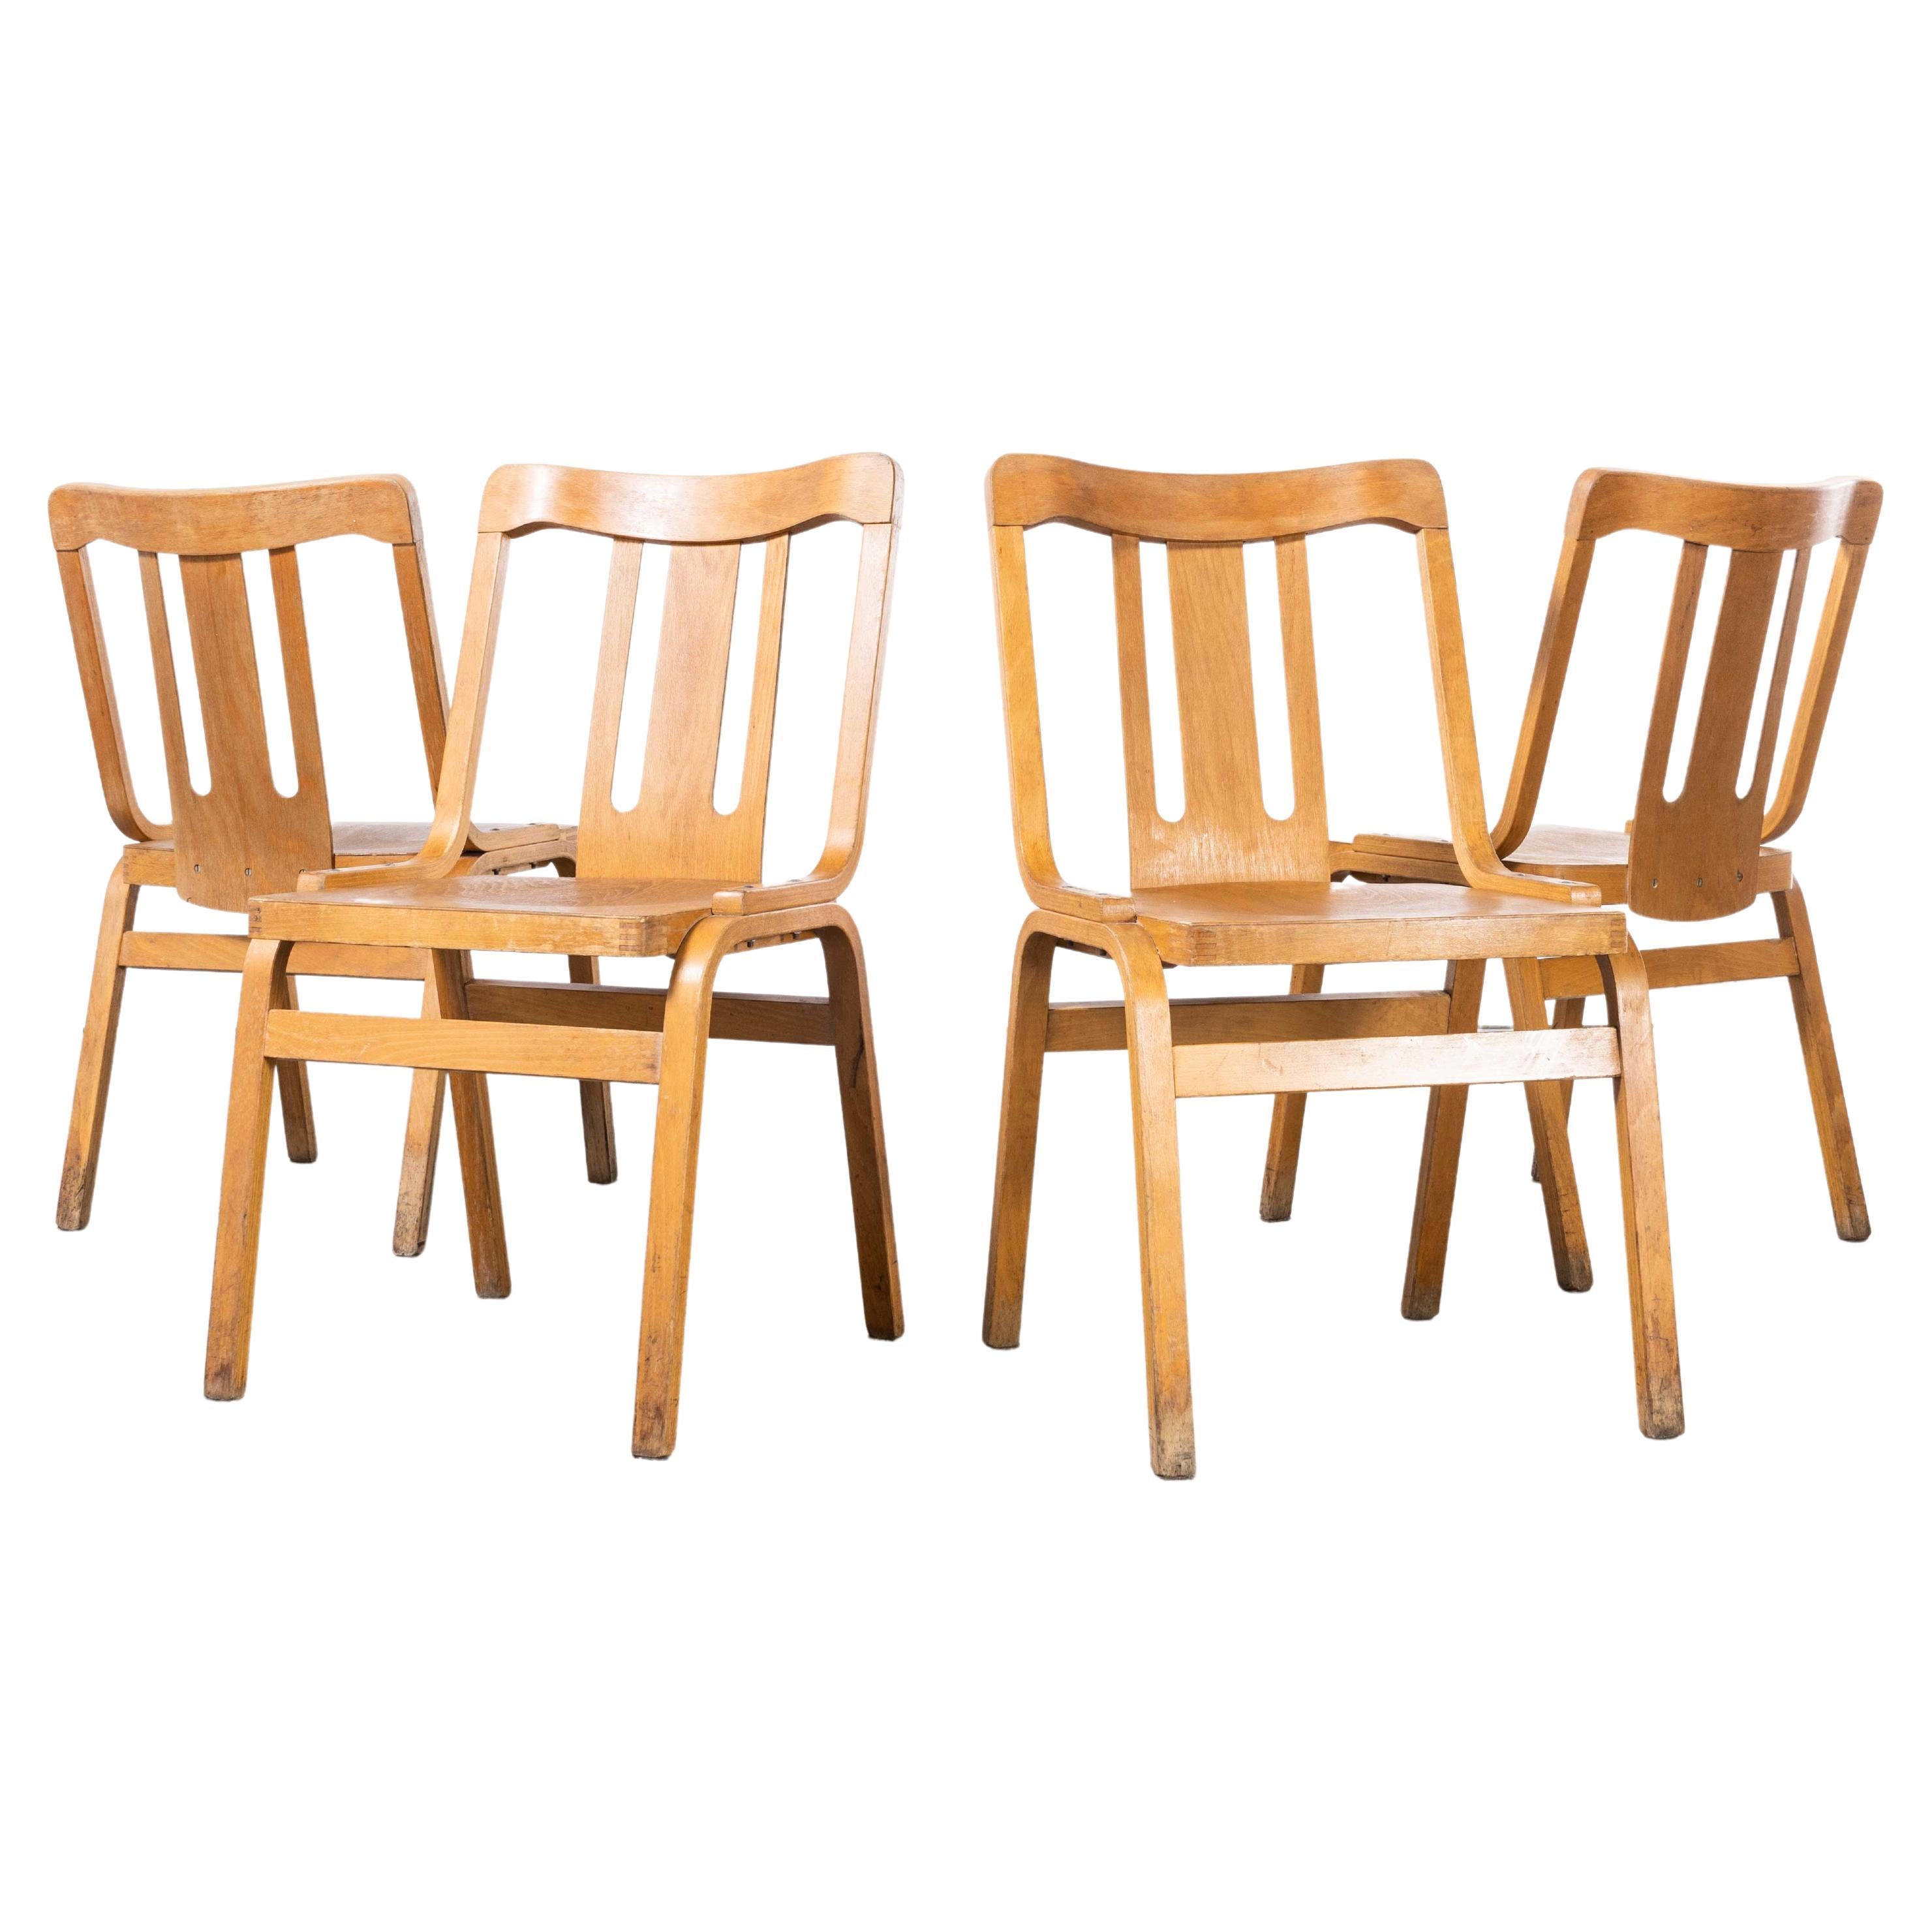 1960's Czech Bentwood Chapel Chairs - Set Of Four For Sale